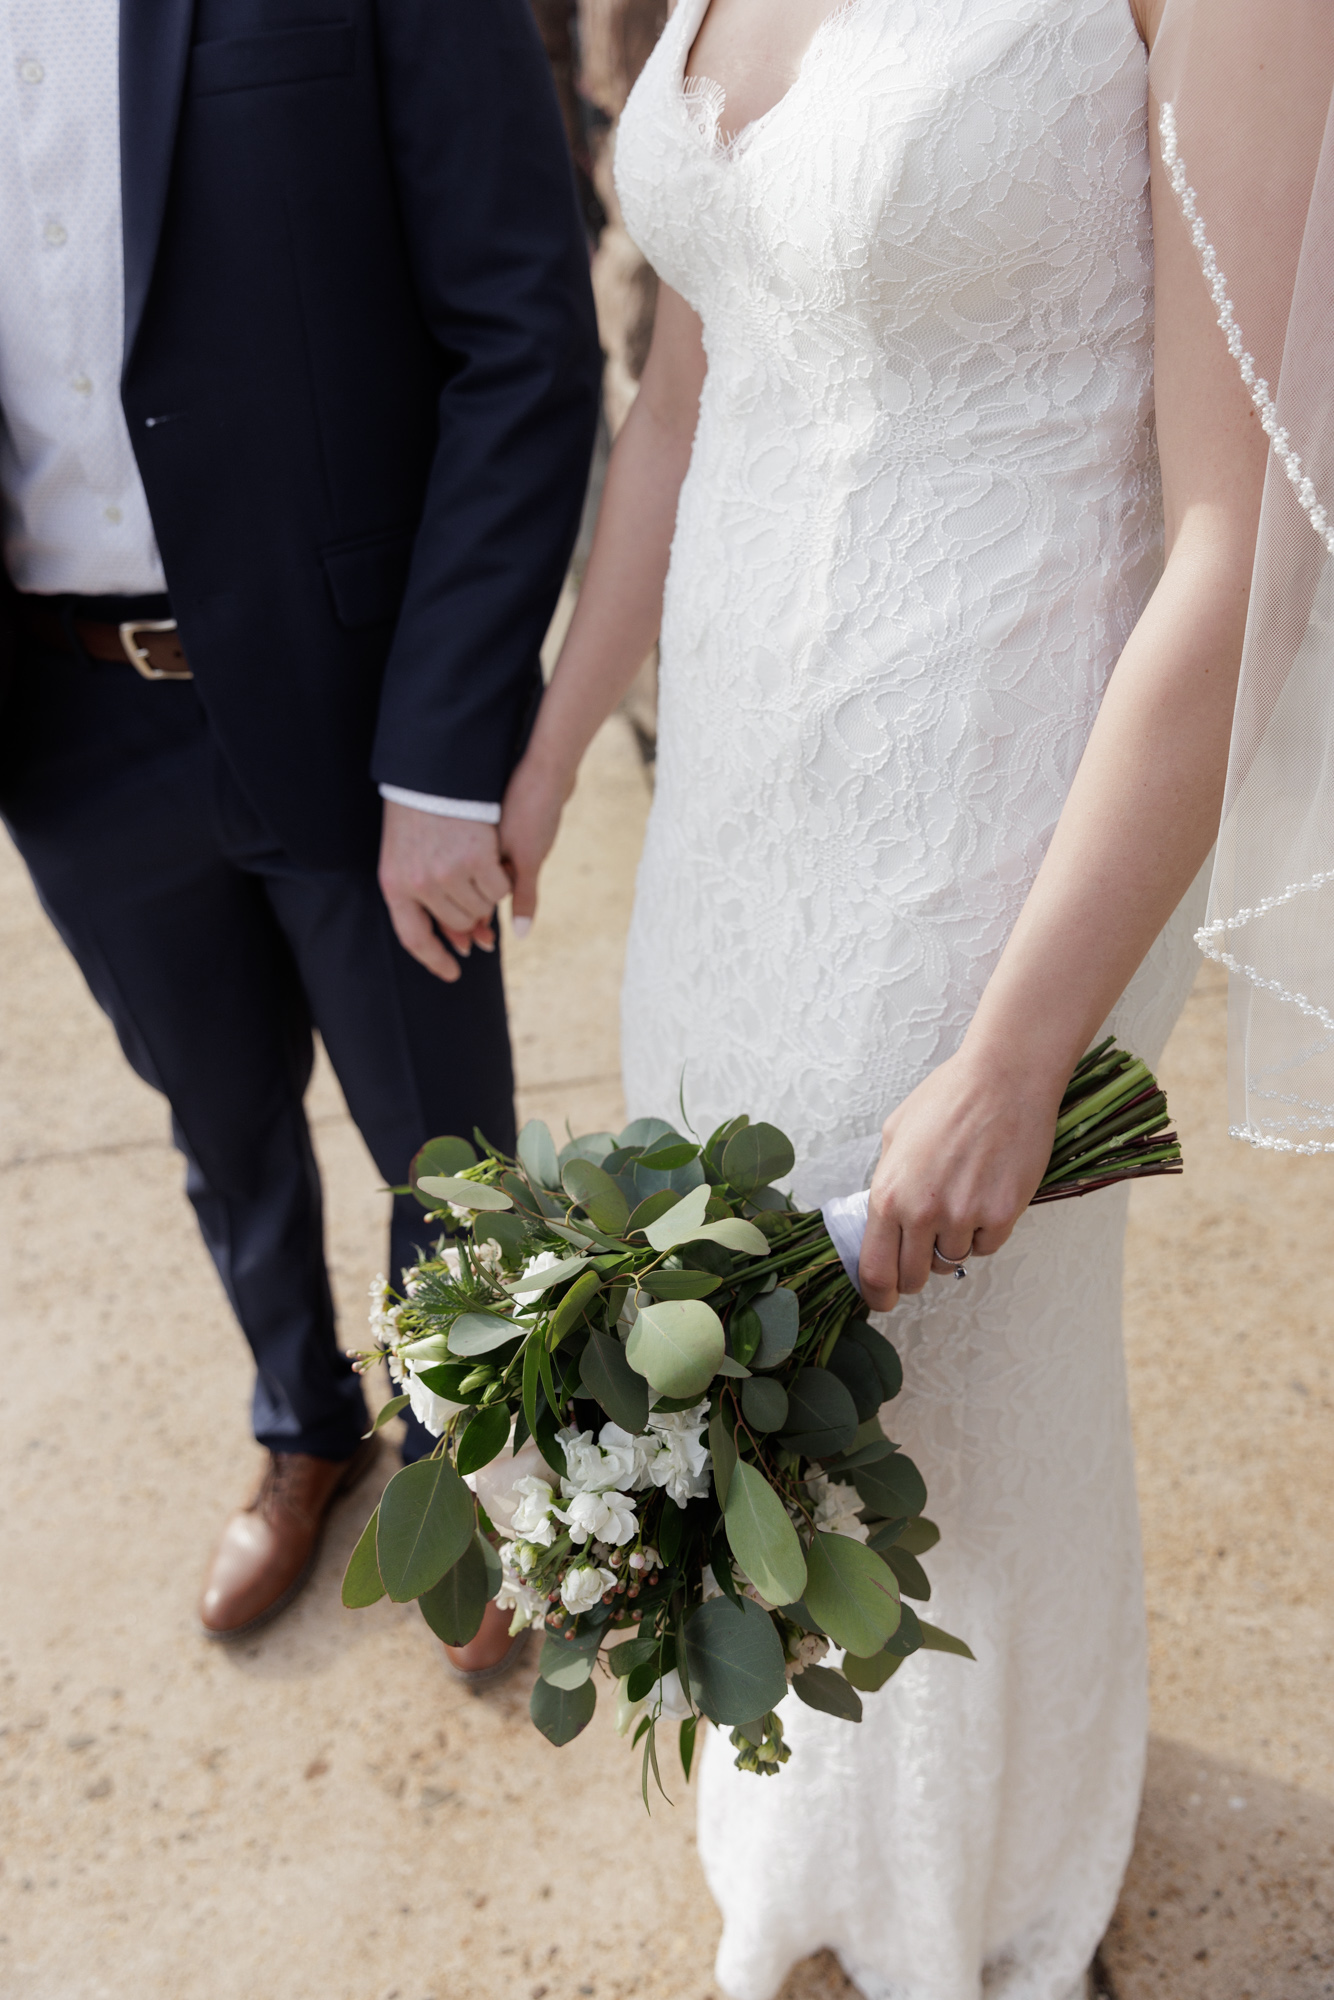 Detail of an elegant bride and groom holding hands and the bride holding a wedding bouquet at a wedding in Bordentown, NJ